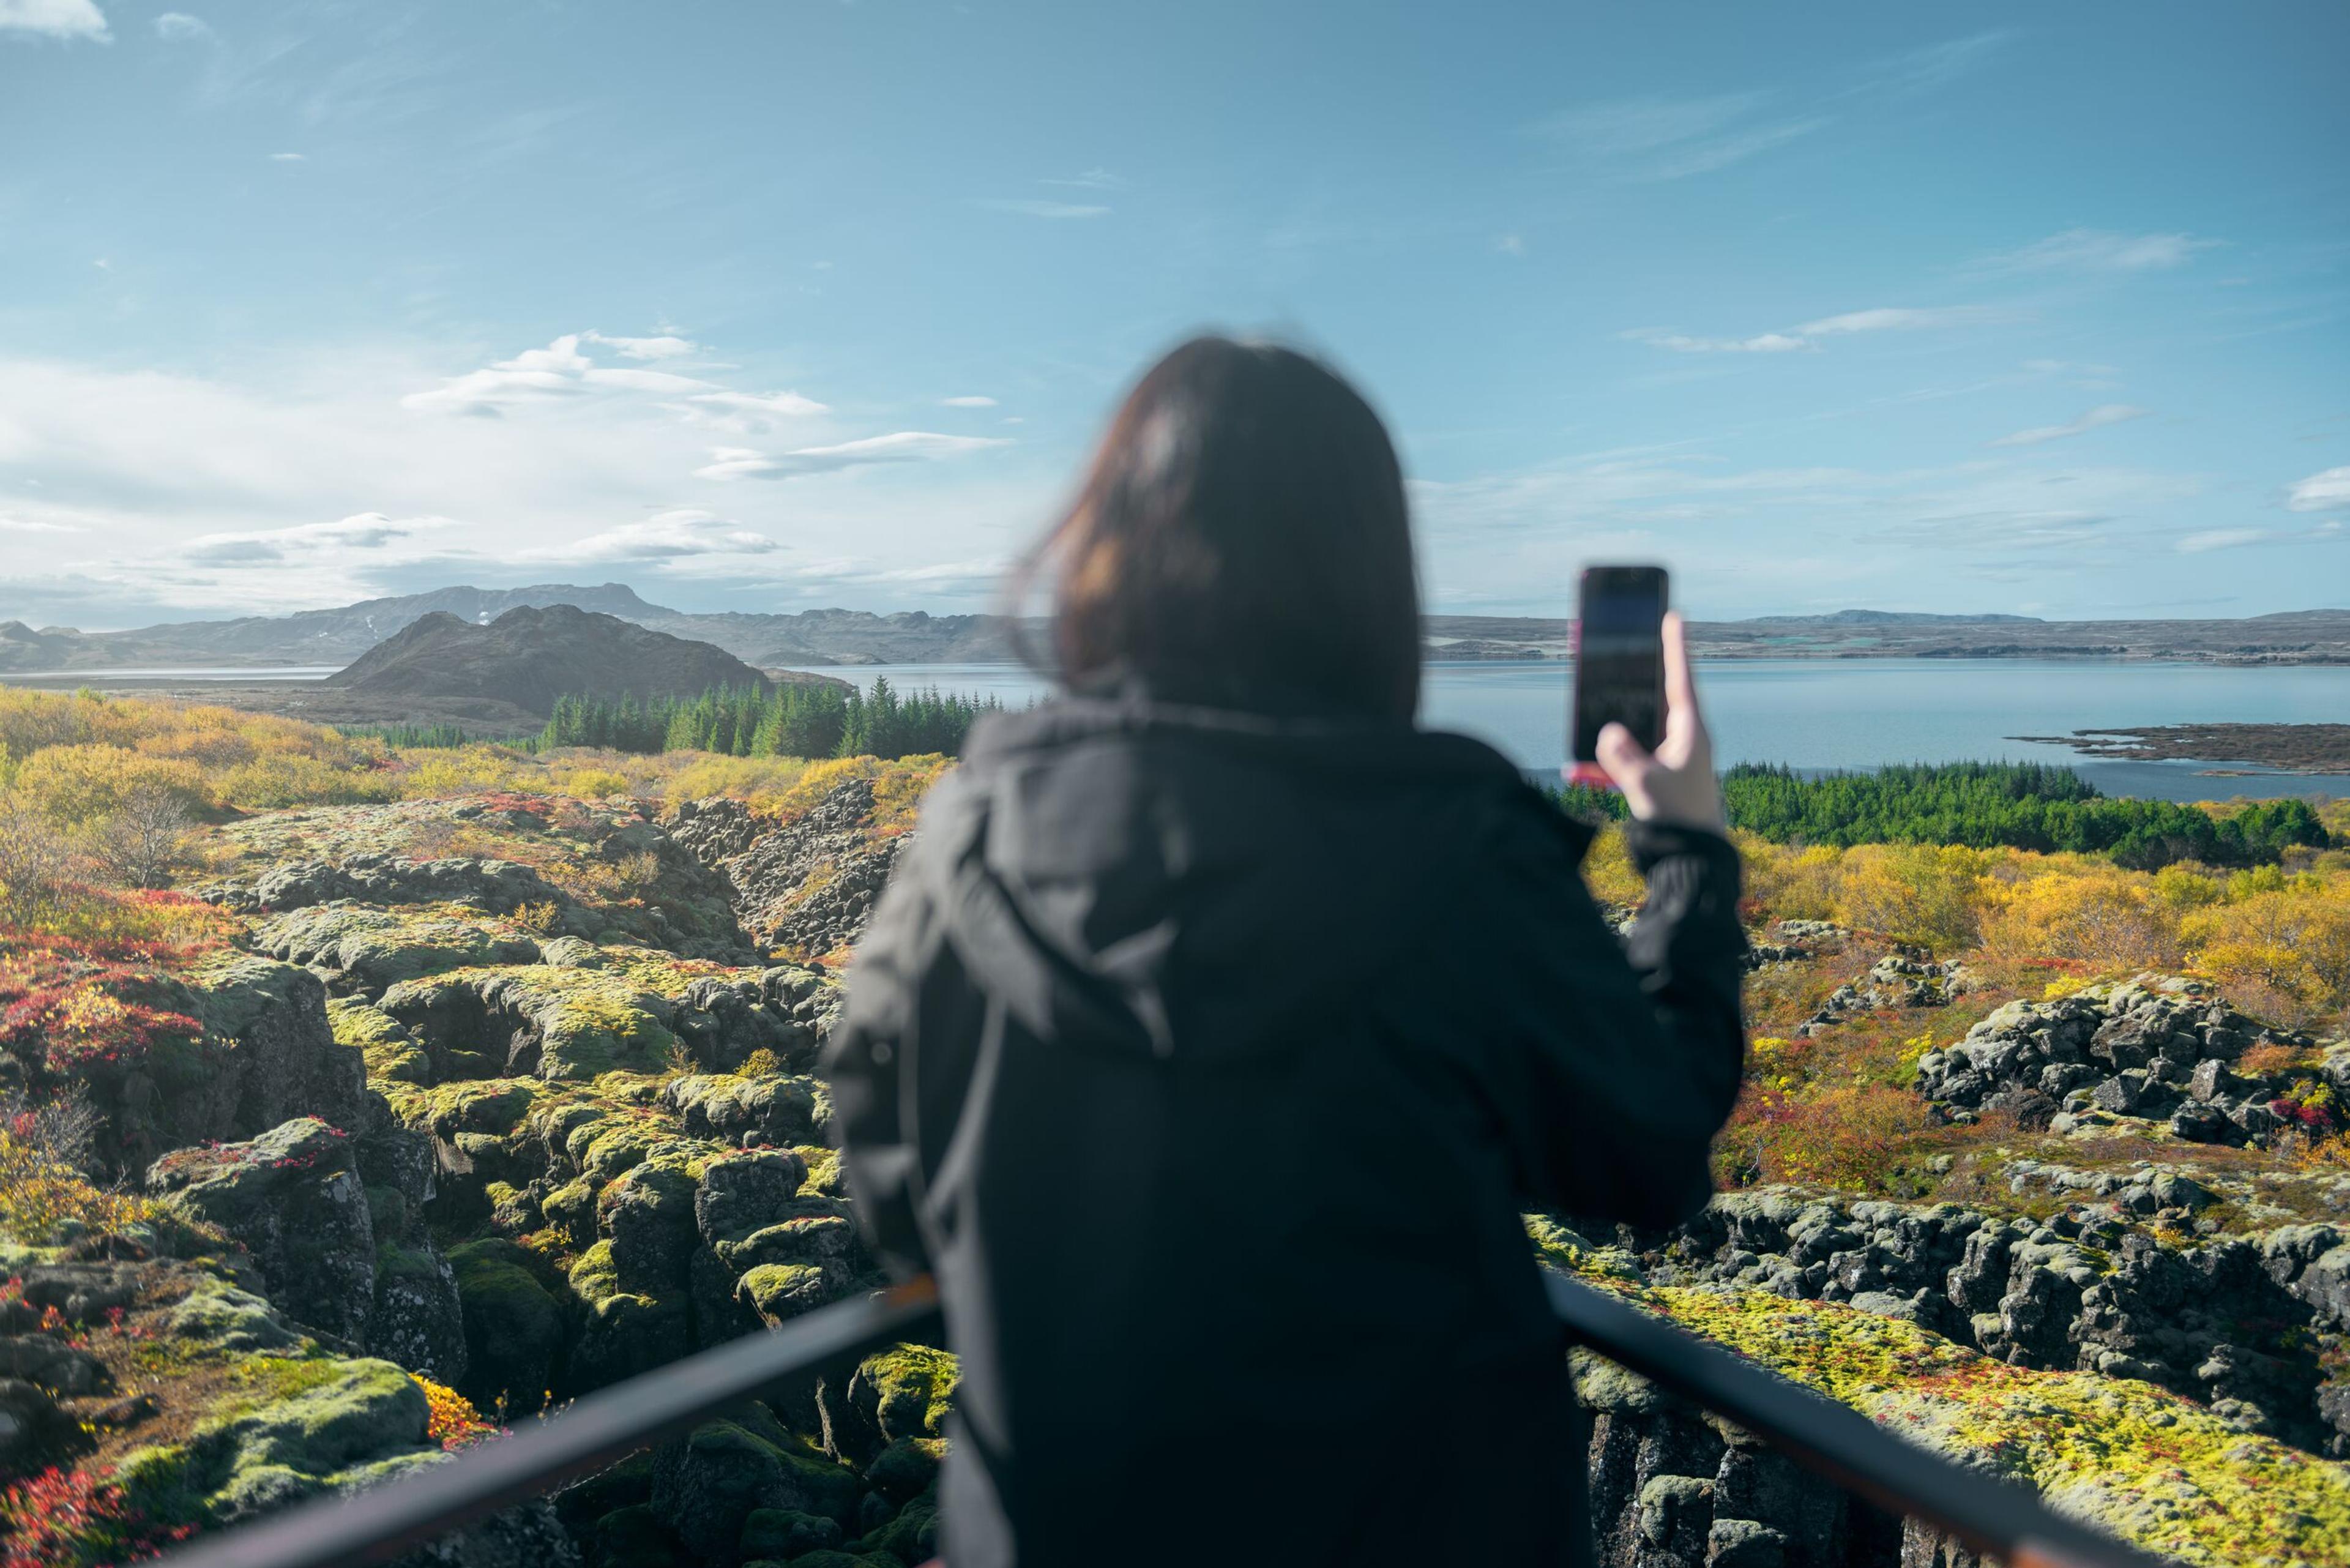 A person in a black jacket taking a photo of a scenic landscape with a smartphone, capturing the vibrant autumn colors and distant mountains under a clear blue sky.